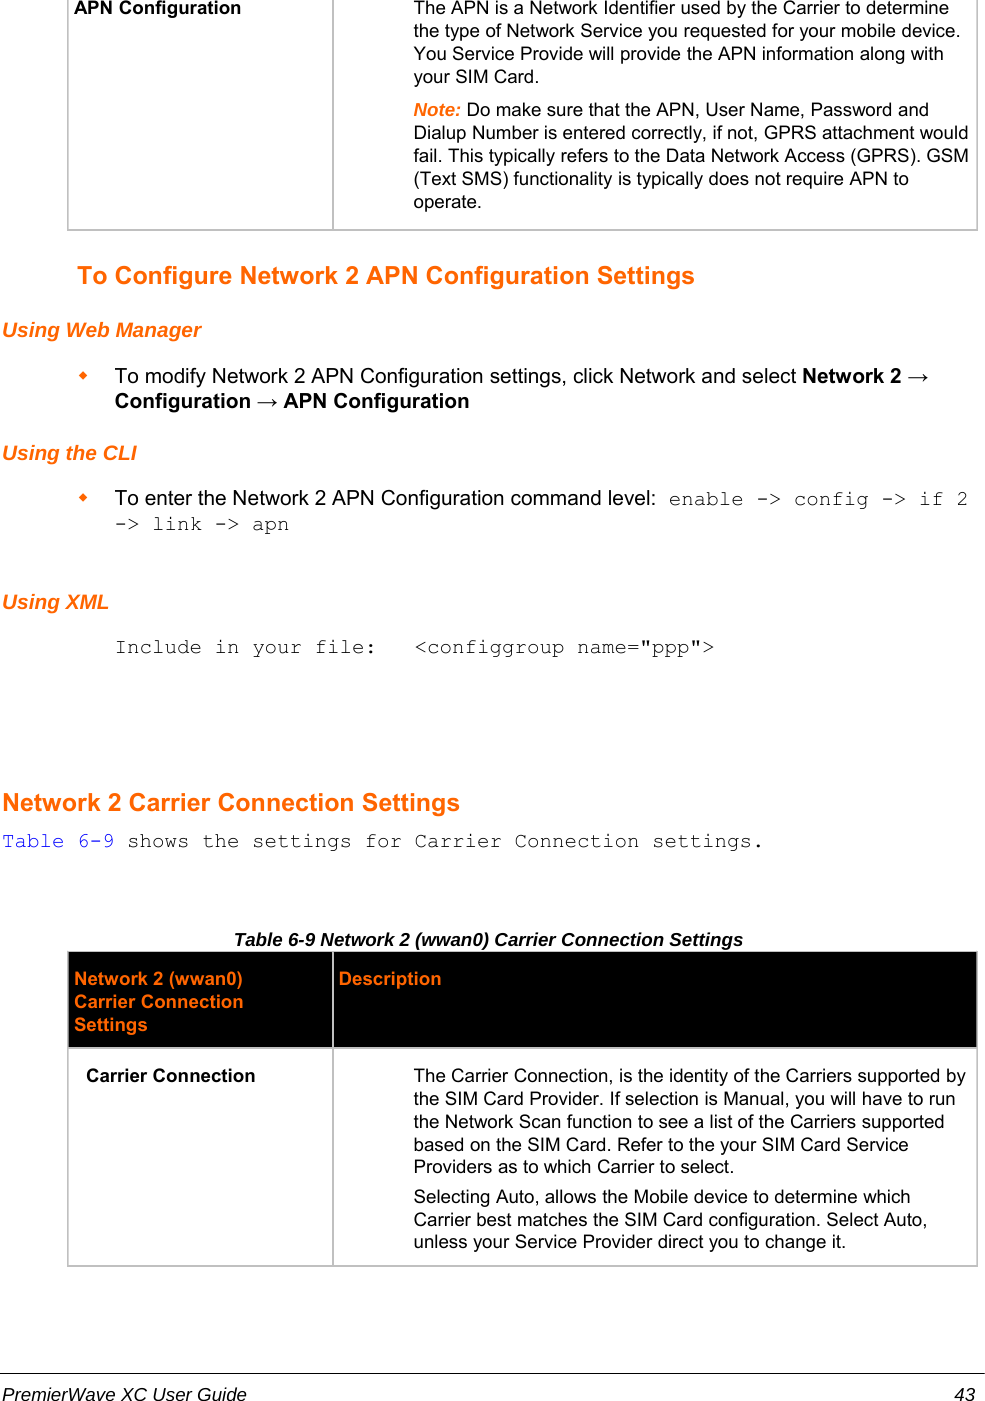 APN Configuration The APN is a Network Identifier used by the Carrier to determinethe type of Network Service you requested for your mobile device.You Service Provide will provide the APN information along withyour SIM Card.Note: Do make sure that the APN, User Name, Password andDialup Number is entered correctly, if not, GPRS attachment wouldfail. This typically refers to the Data Network Access (GPRS). GSM(Text SMS) functionality is typically does not require APN tooperate.To Configure Network 2 APN Configuration SettingsUsing Web ManagerTo modify Network 2 APN Configuration settings, click Network and select Network 2 →Configuration → APN ConfigurationUsing the CLITo enter the Network 2 APN Configuration command level: enable -&gt; config -&gt; if 2-&gt; link -&gt; apnUsing XMLInclude in your file:   &lt;configgroup name=&quot;ppp&quot;&gt;Network 2 Carrier Connection SettingsTable 6-9 shows the settings for Carrier Connection settings.Table 6-9 Network 2 (wwan0) Carrier Connection SettingsNetwork 2 (wwan0)Carrier ConnectionSettingsDescriptionCarrier Connection The Carrier Connection, is the identity of the Carriers supported bythe SIM Card Provider. If selection is Manual, you will have to runthe Network Scan function to see a list of the Carriers supportedbased on the SIM Card. Refer to the your SIM Card ServiceProviders as to which Carrier to select.Selecting Auto, allows the Mobile device to determine whichCarrier best matches the SIM Card configuration. Select Auto,unless your Service Provider direct you to change it.PremierWave XC User Guide 43